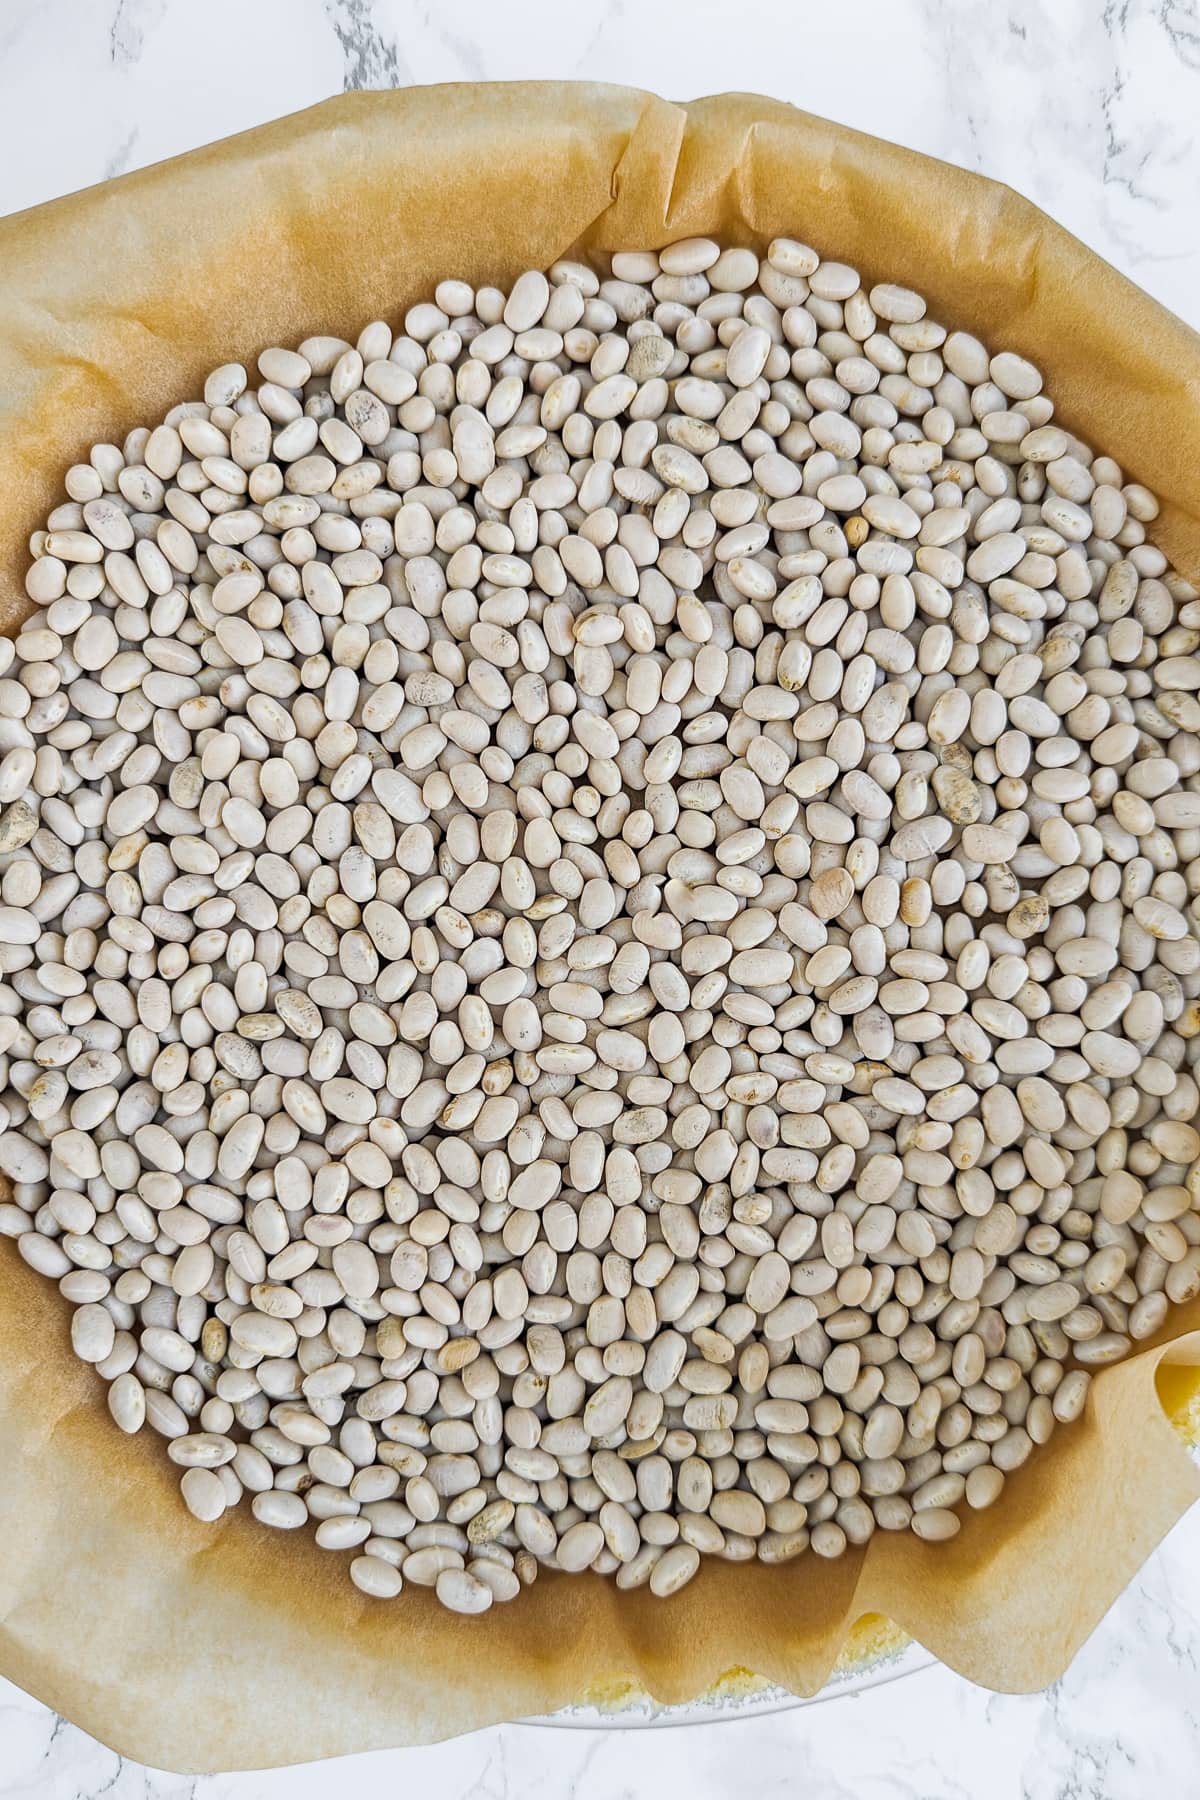 Top view of white beans on a parchment paper on a white marble table.